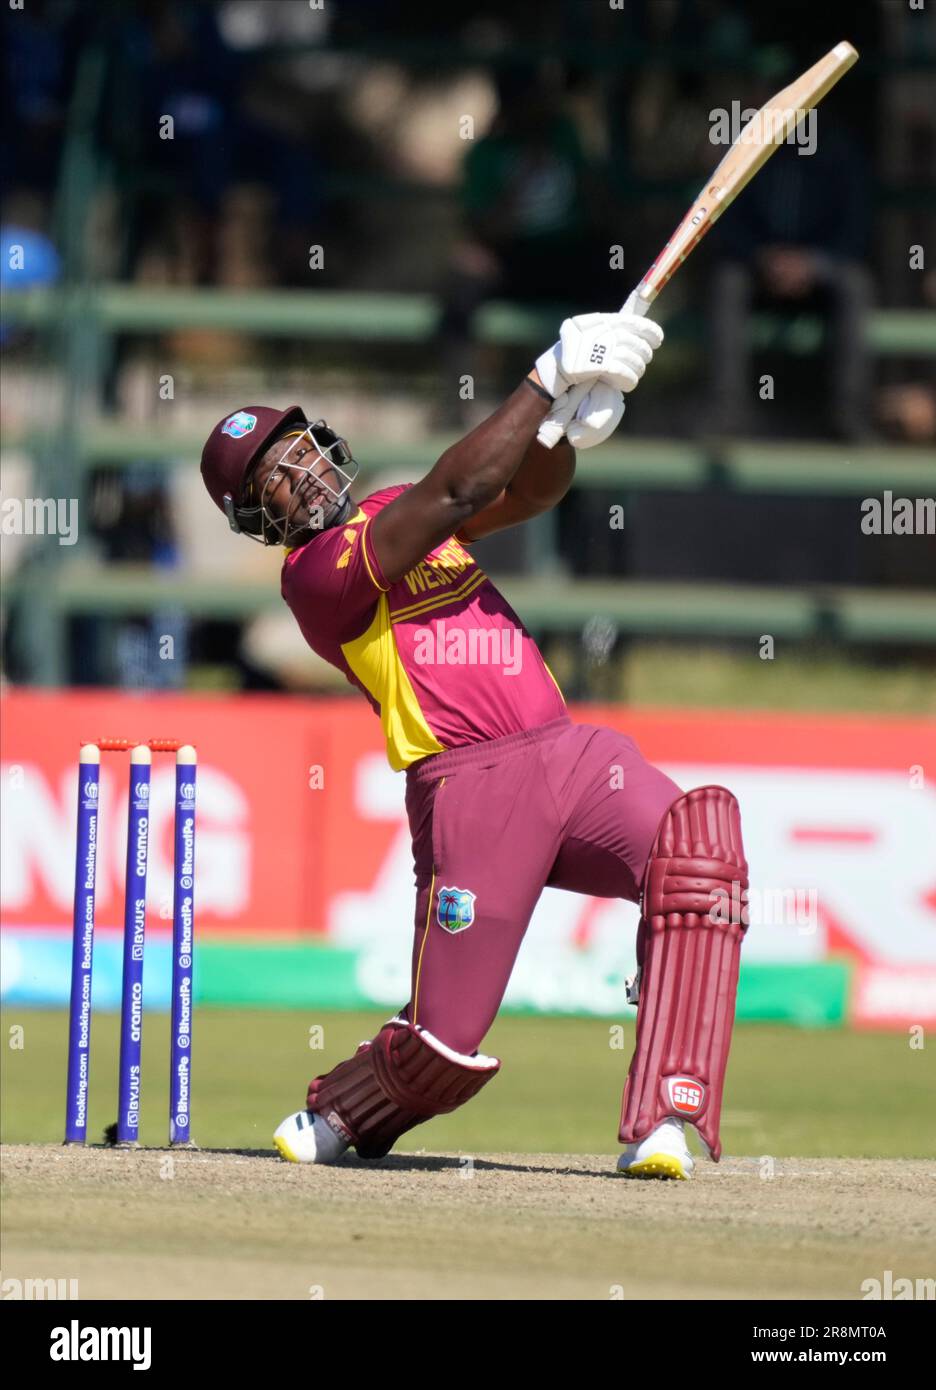 West Indies batsman Rovman Powell in action during their ICC Mens Cricket World Cup Qualifier match against Nepal at Harare Sports Club in Harare, Zimbabwe, Thursday June, 22, 2023